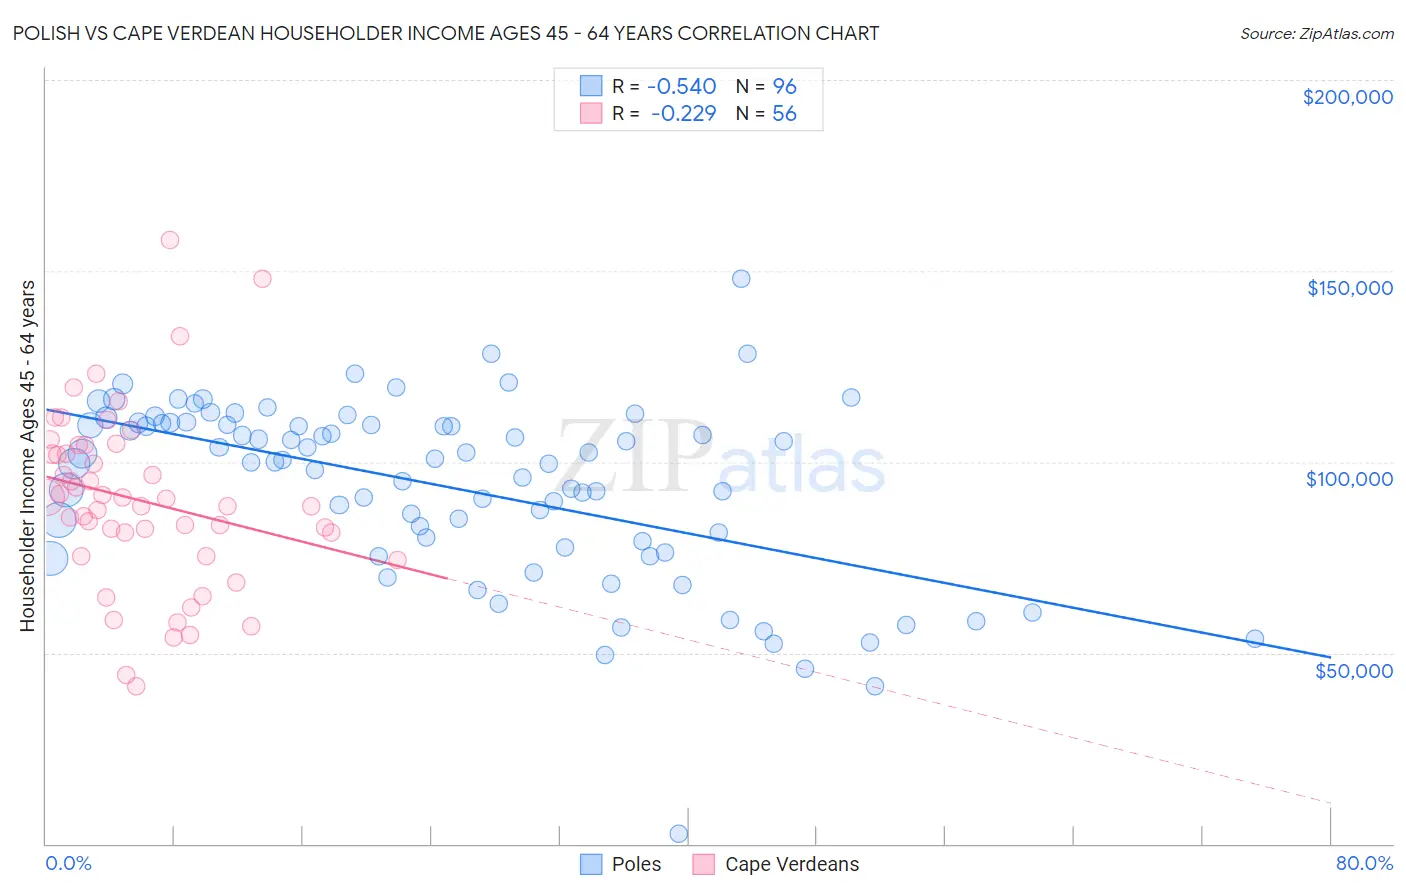 Polish vs Cape Verdean Householder Income Ages 45 - 64 years